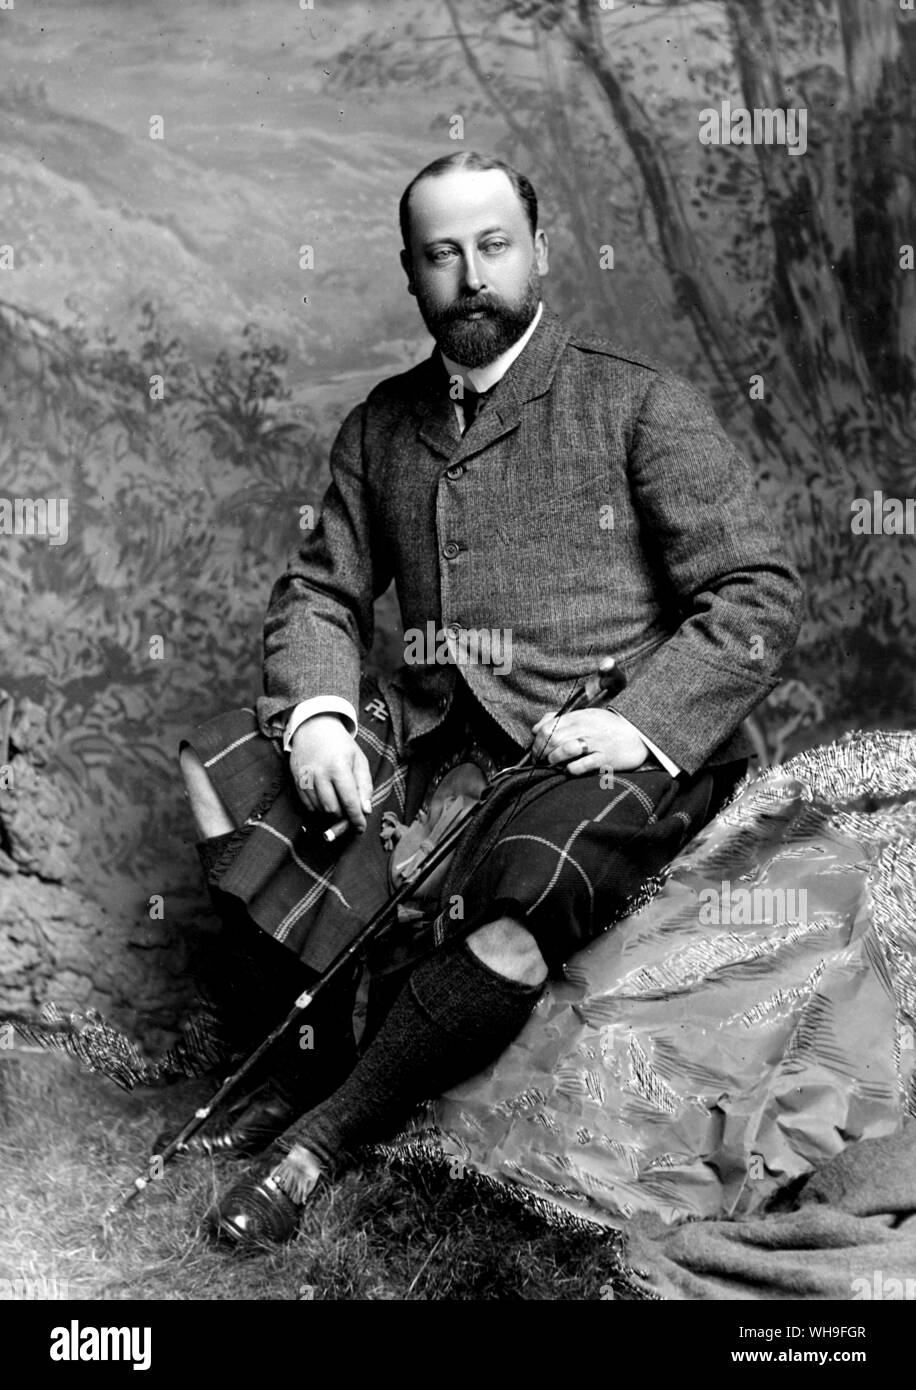 Edward, Prince of Wales (1841-1910), circa 1880. Later King Edward VII from 1901-1910. Stock Photo